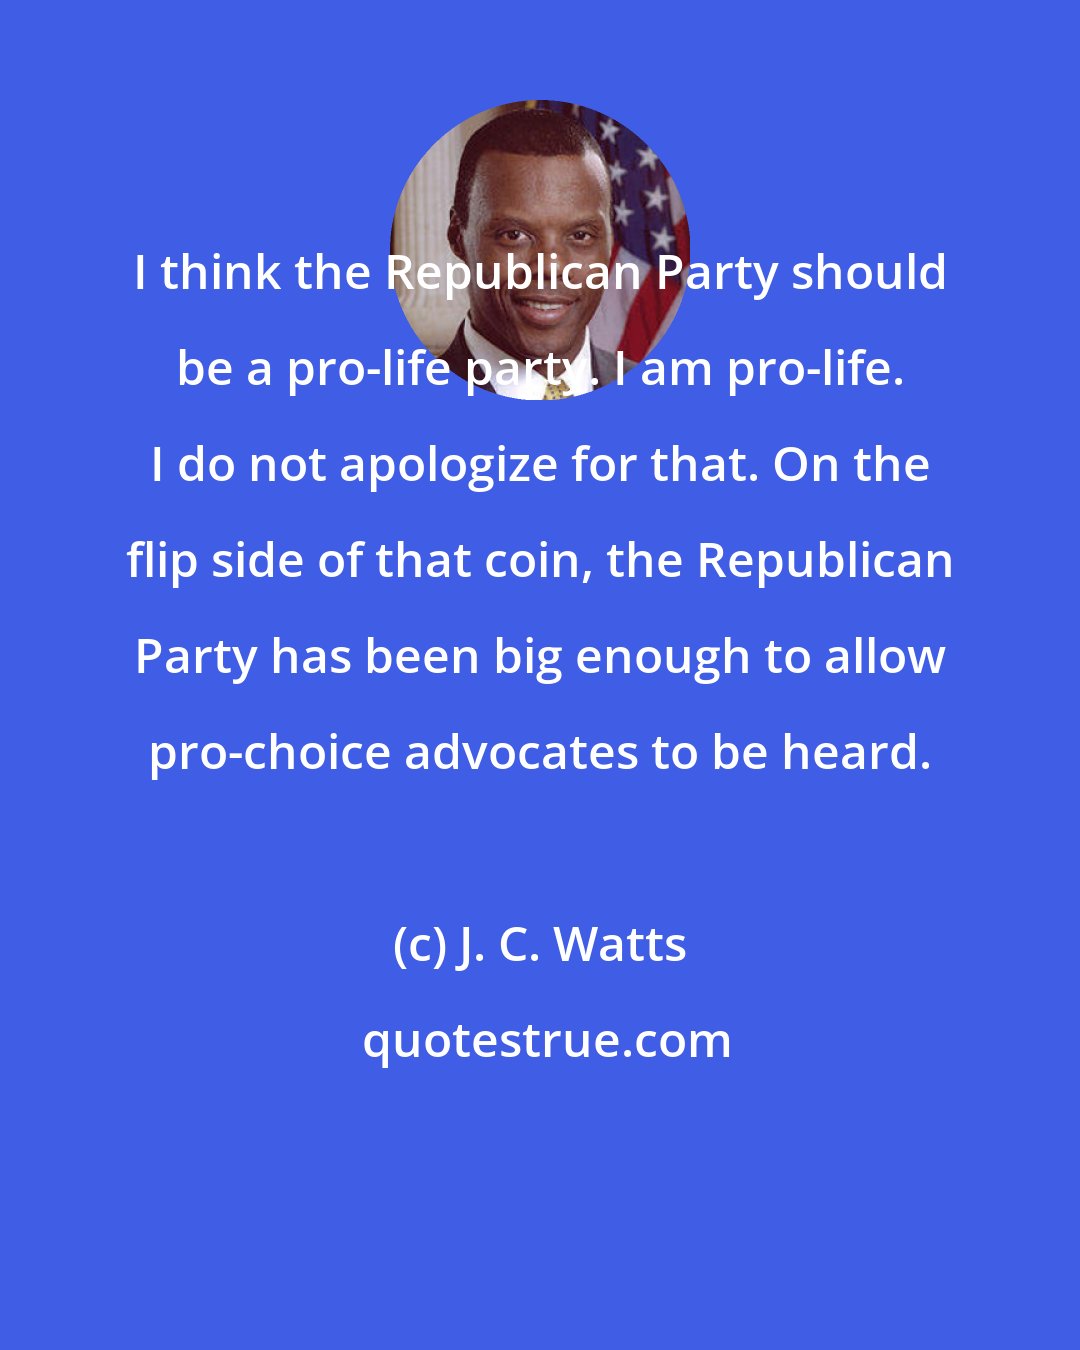 J. C. Watts: I think the Republican Party should be a pro-life party. I am pro-life. I do not apologize for that. On the flip side of that coin, the Republican Party has been big enough to allow pro-choice advocates to be heard.